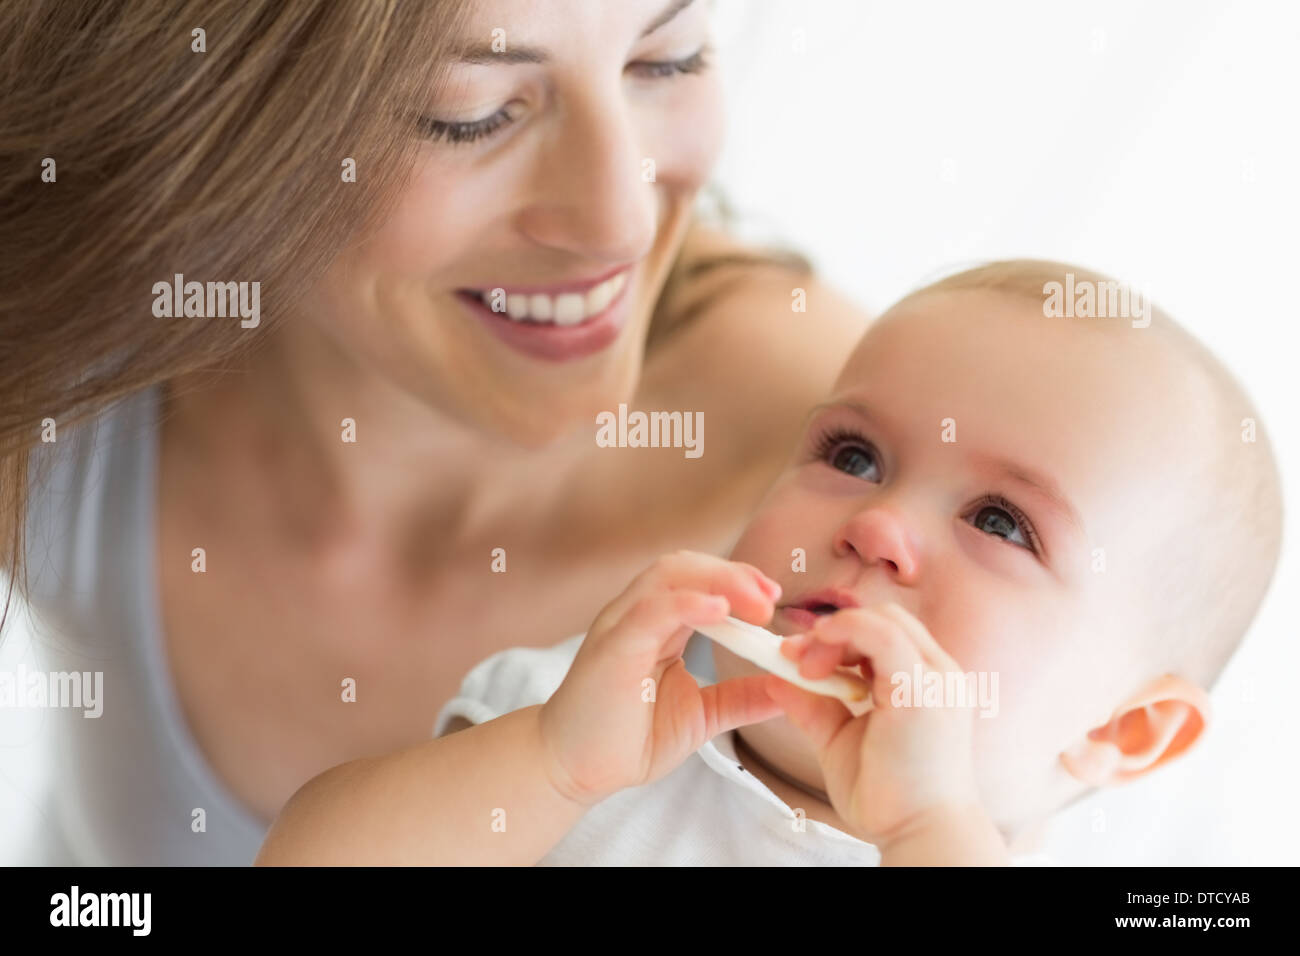 Closeup of smiling mother and baby Stock Photo